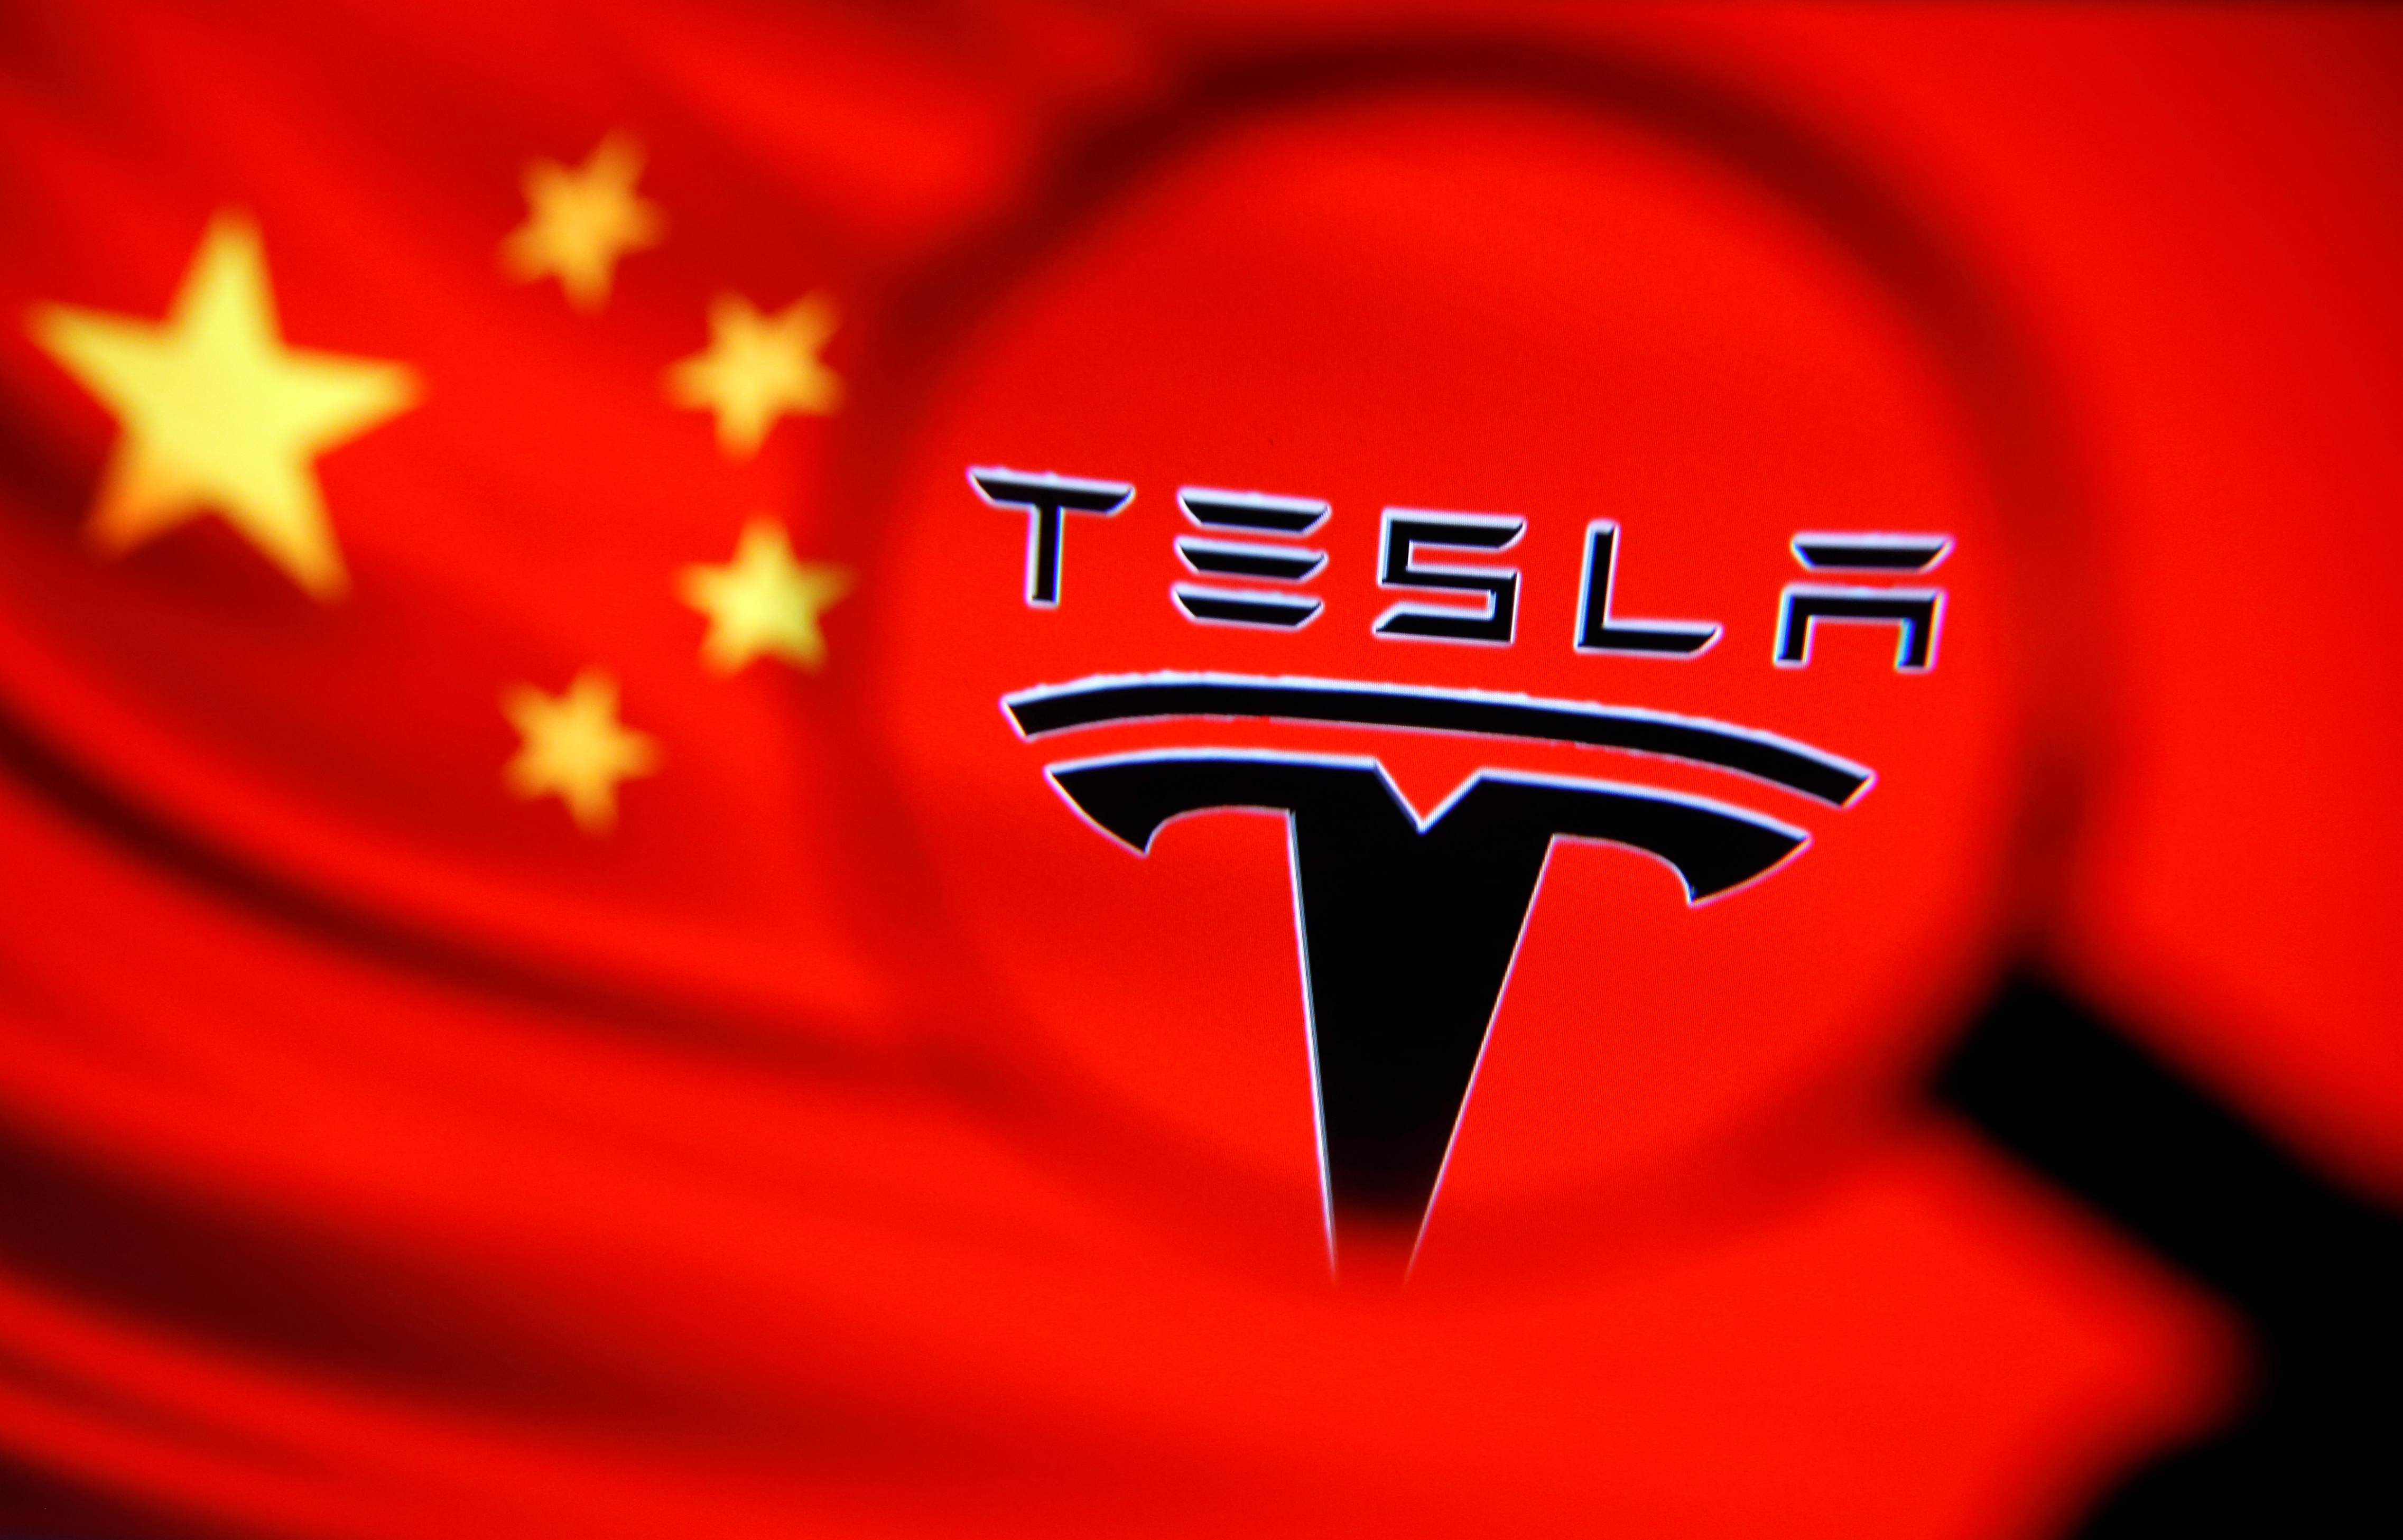 Chinese flag and Tesla logo is seen through a magnifier in this illustration